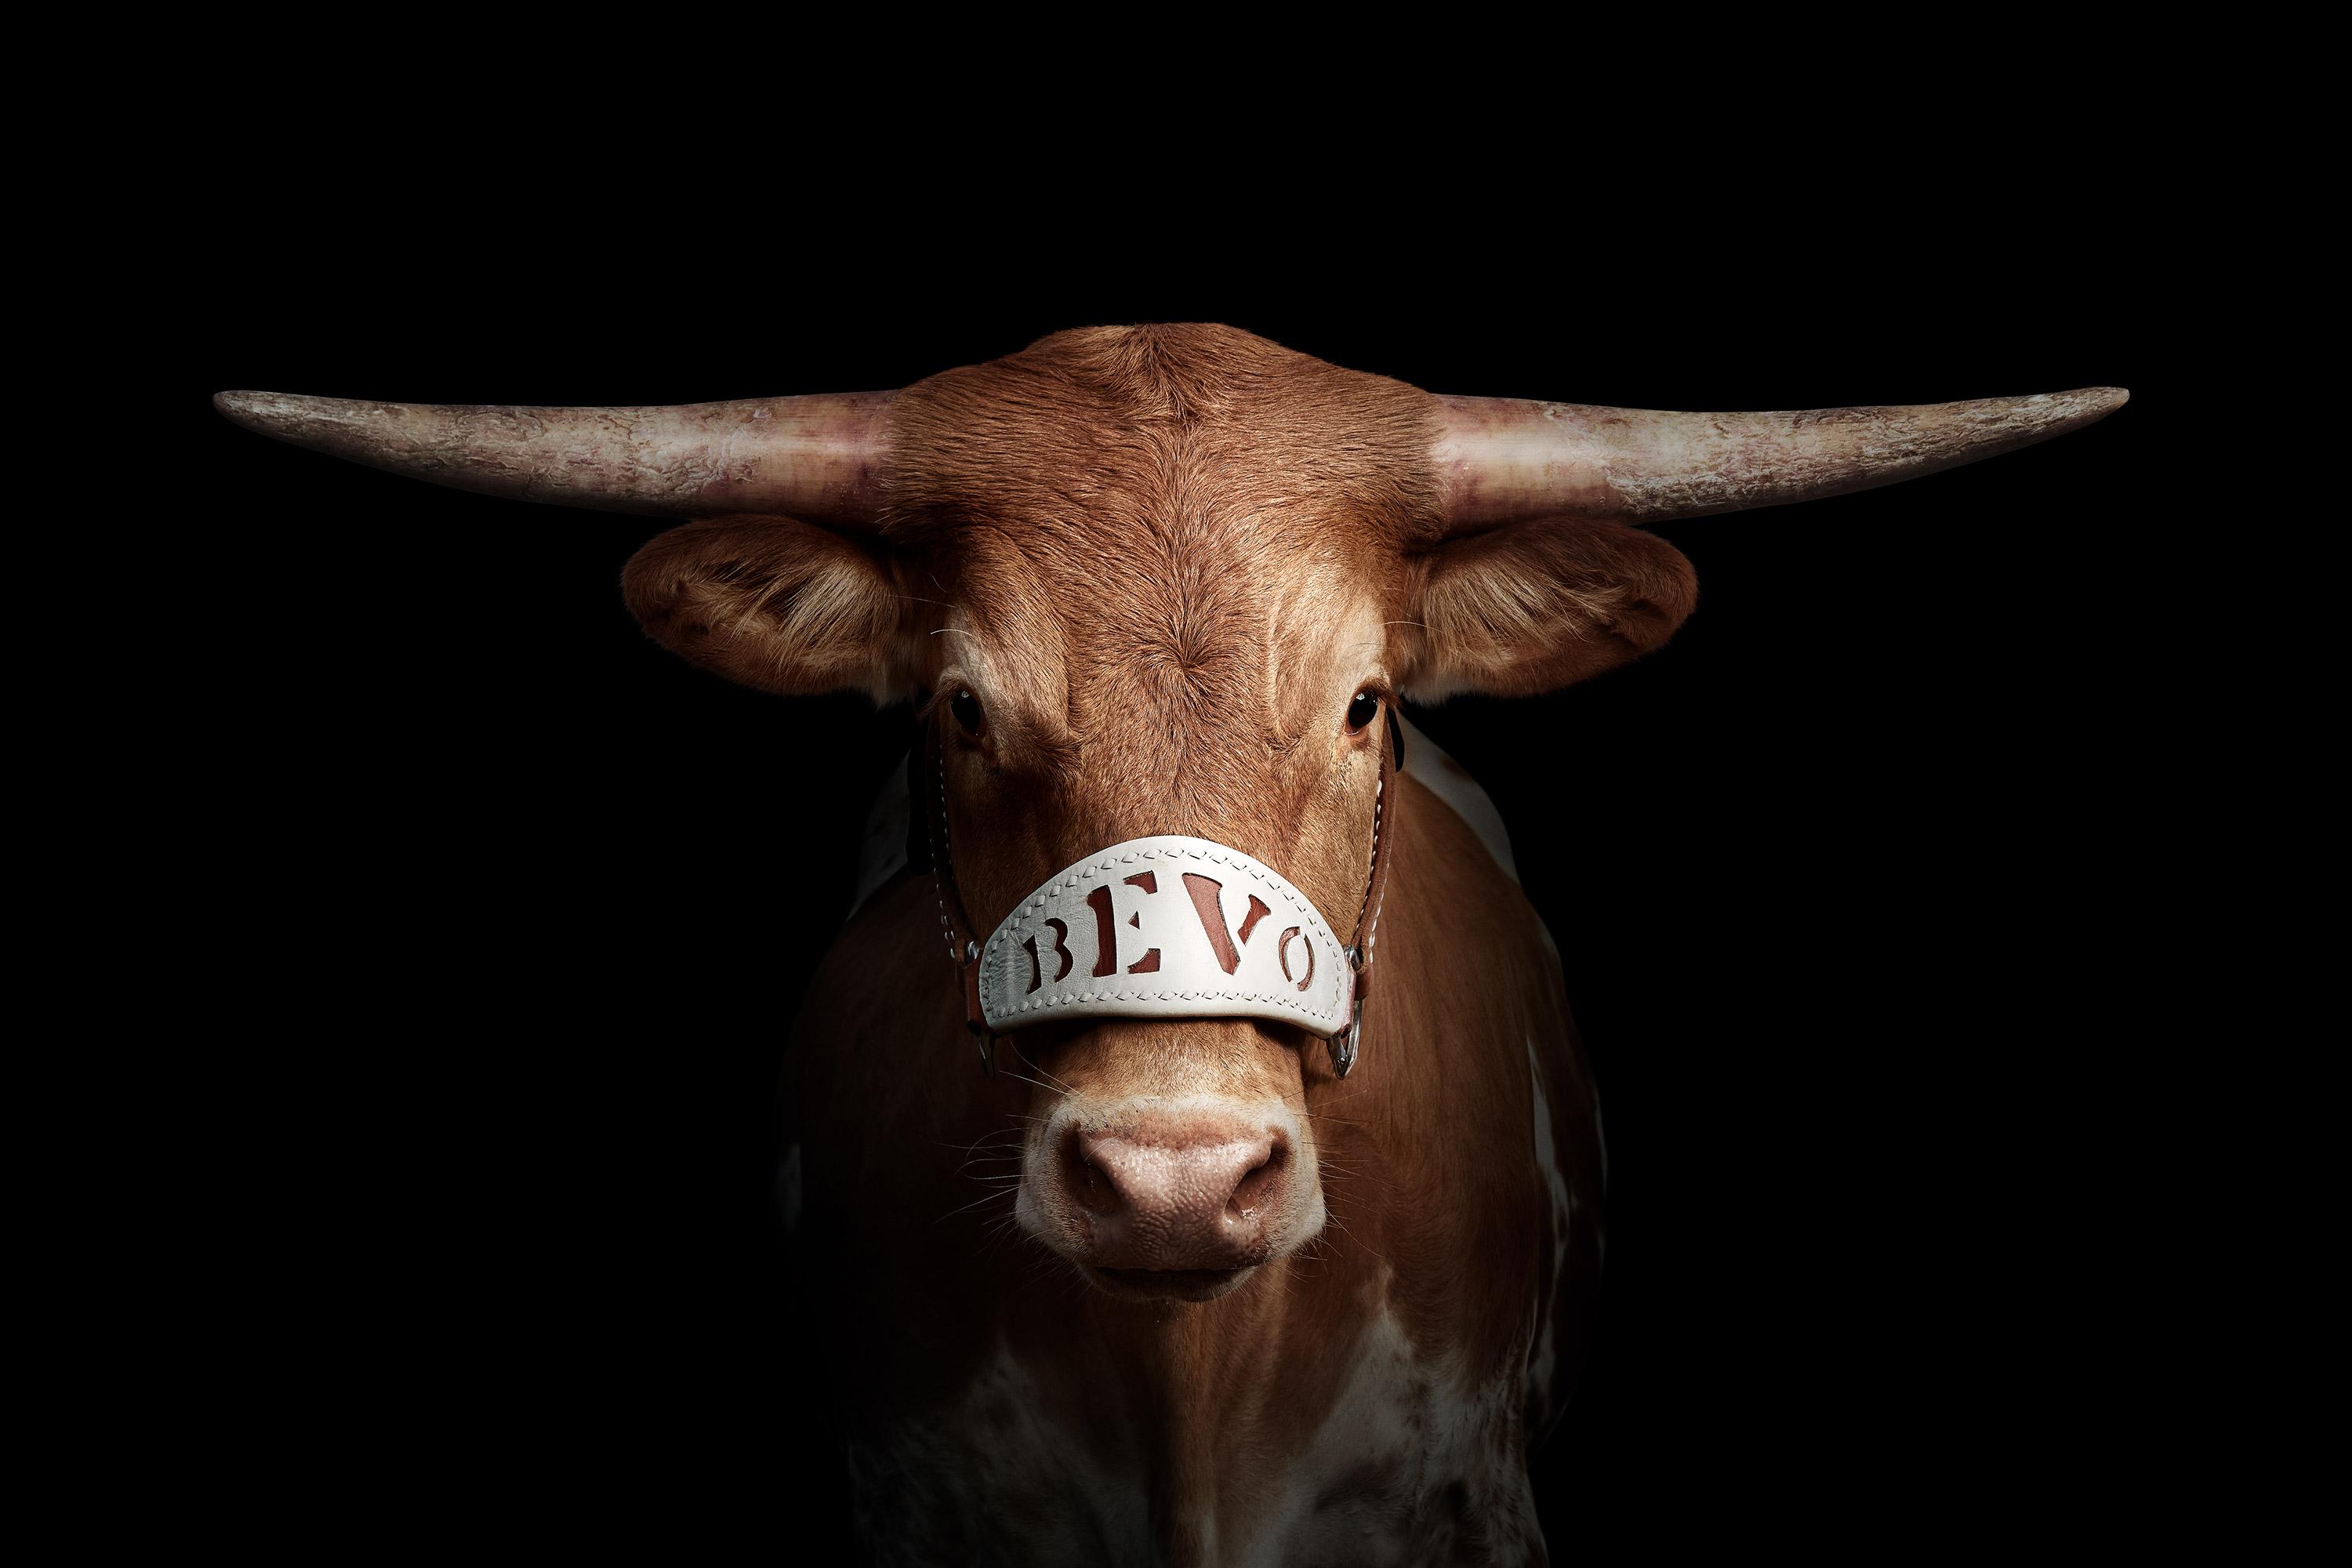 It was an honor that I had the chance to photograph University of Texas mascot, Bevo XIV when he was still alive.  So when the Alcalde, the publication of the Texas Exes, called and asked if I would be willing to photograph Bevo XV for his debut, I